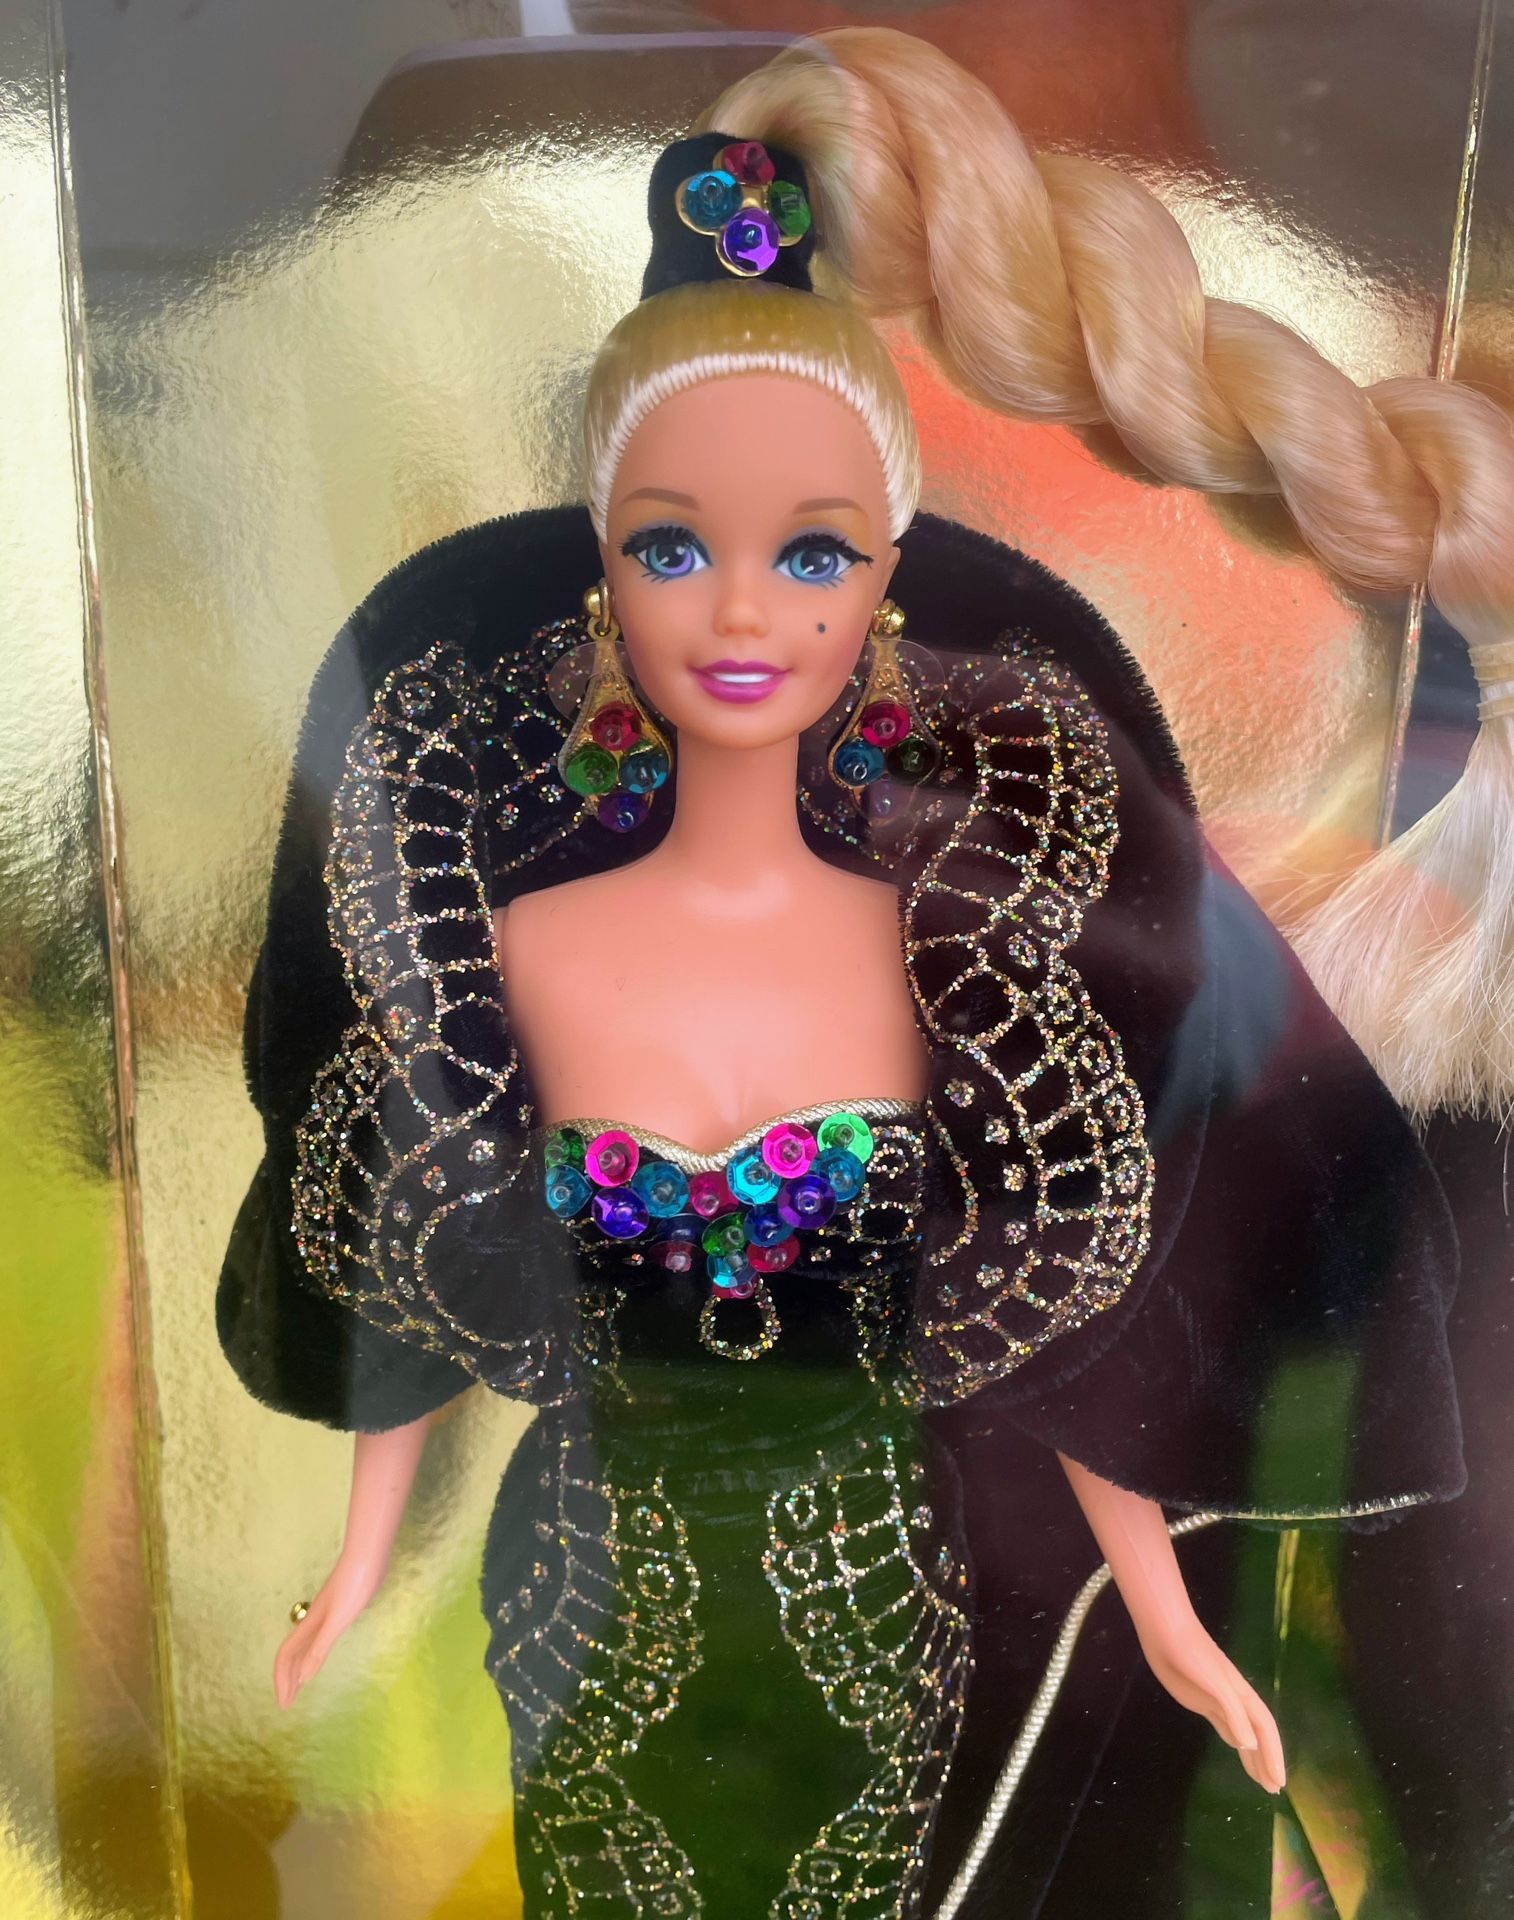 1995 Midnight Gala Barbie Doll By Mattel Inc. | Classique Collection Collector Doll | Complete, Mint, NRFB